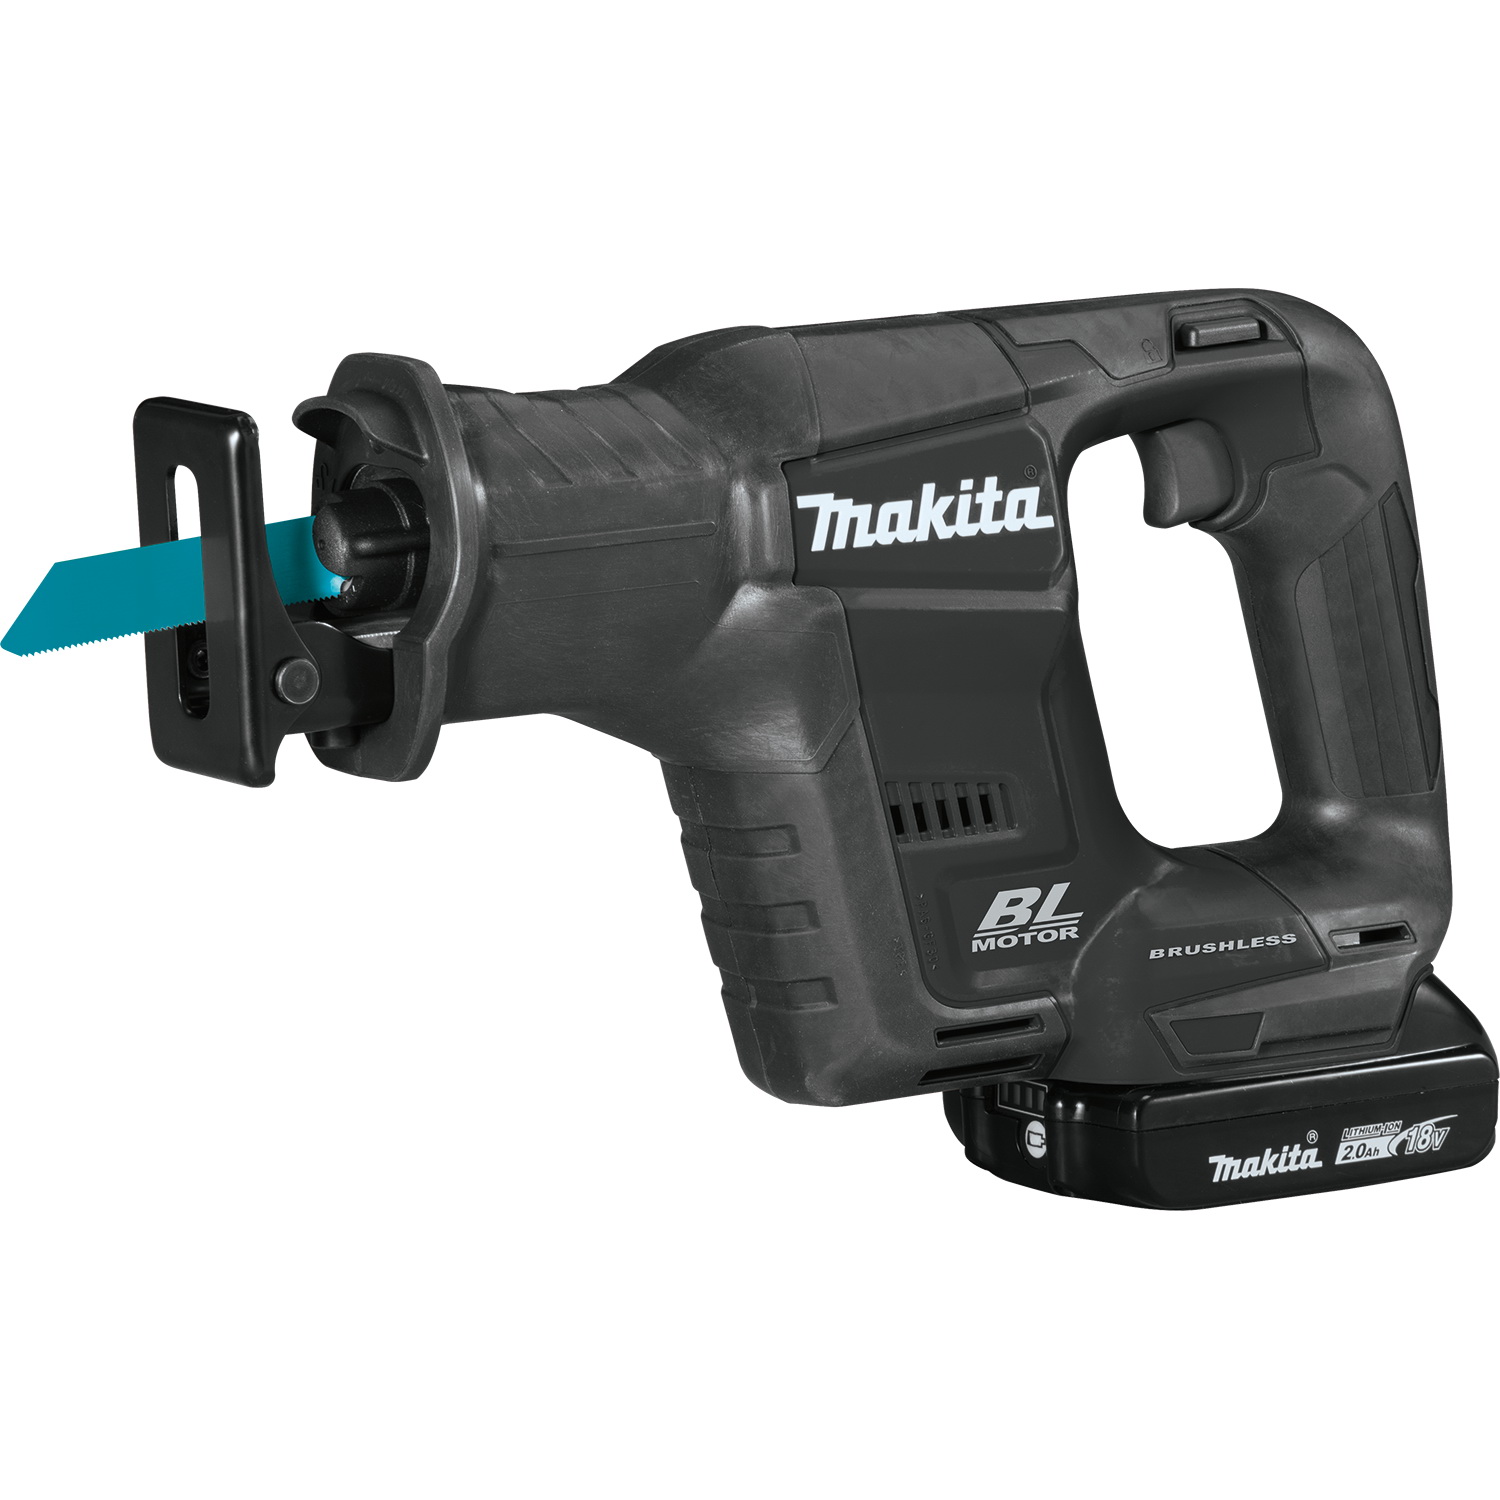 Makita XRJ07R1B Reciprocating Saw Kit, Battery Included, 18 V, 2 Ah, 5-1/8 in Pipe, 10 in Wood Cutting Capacity - 2